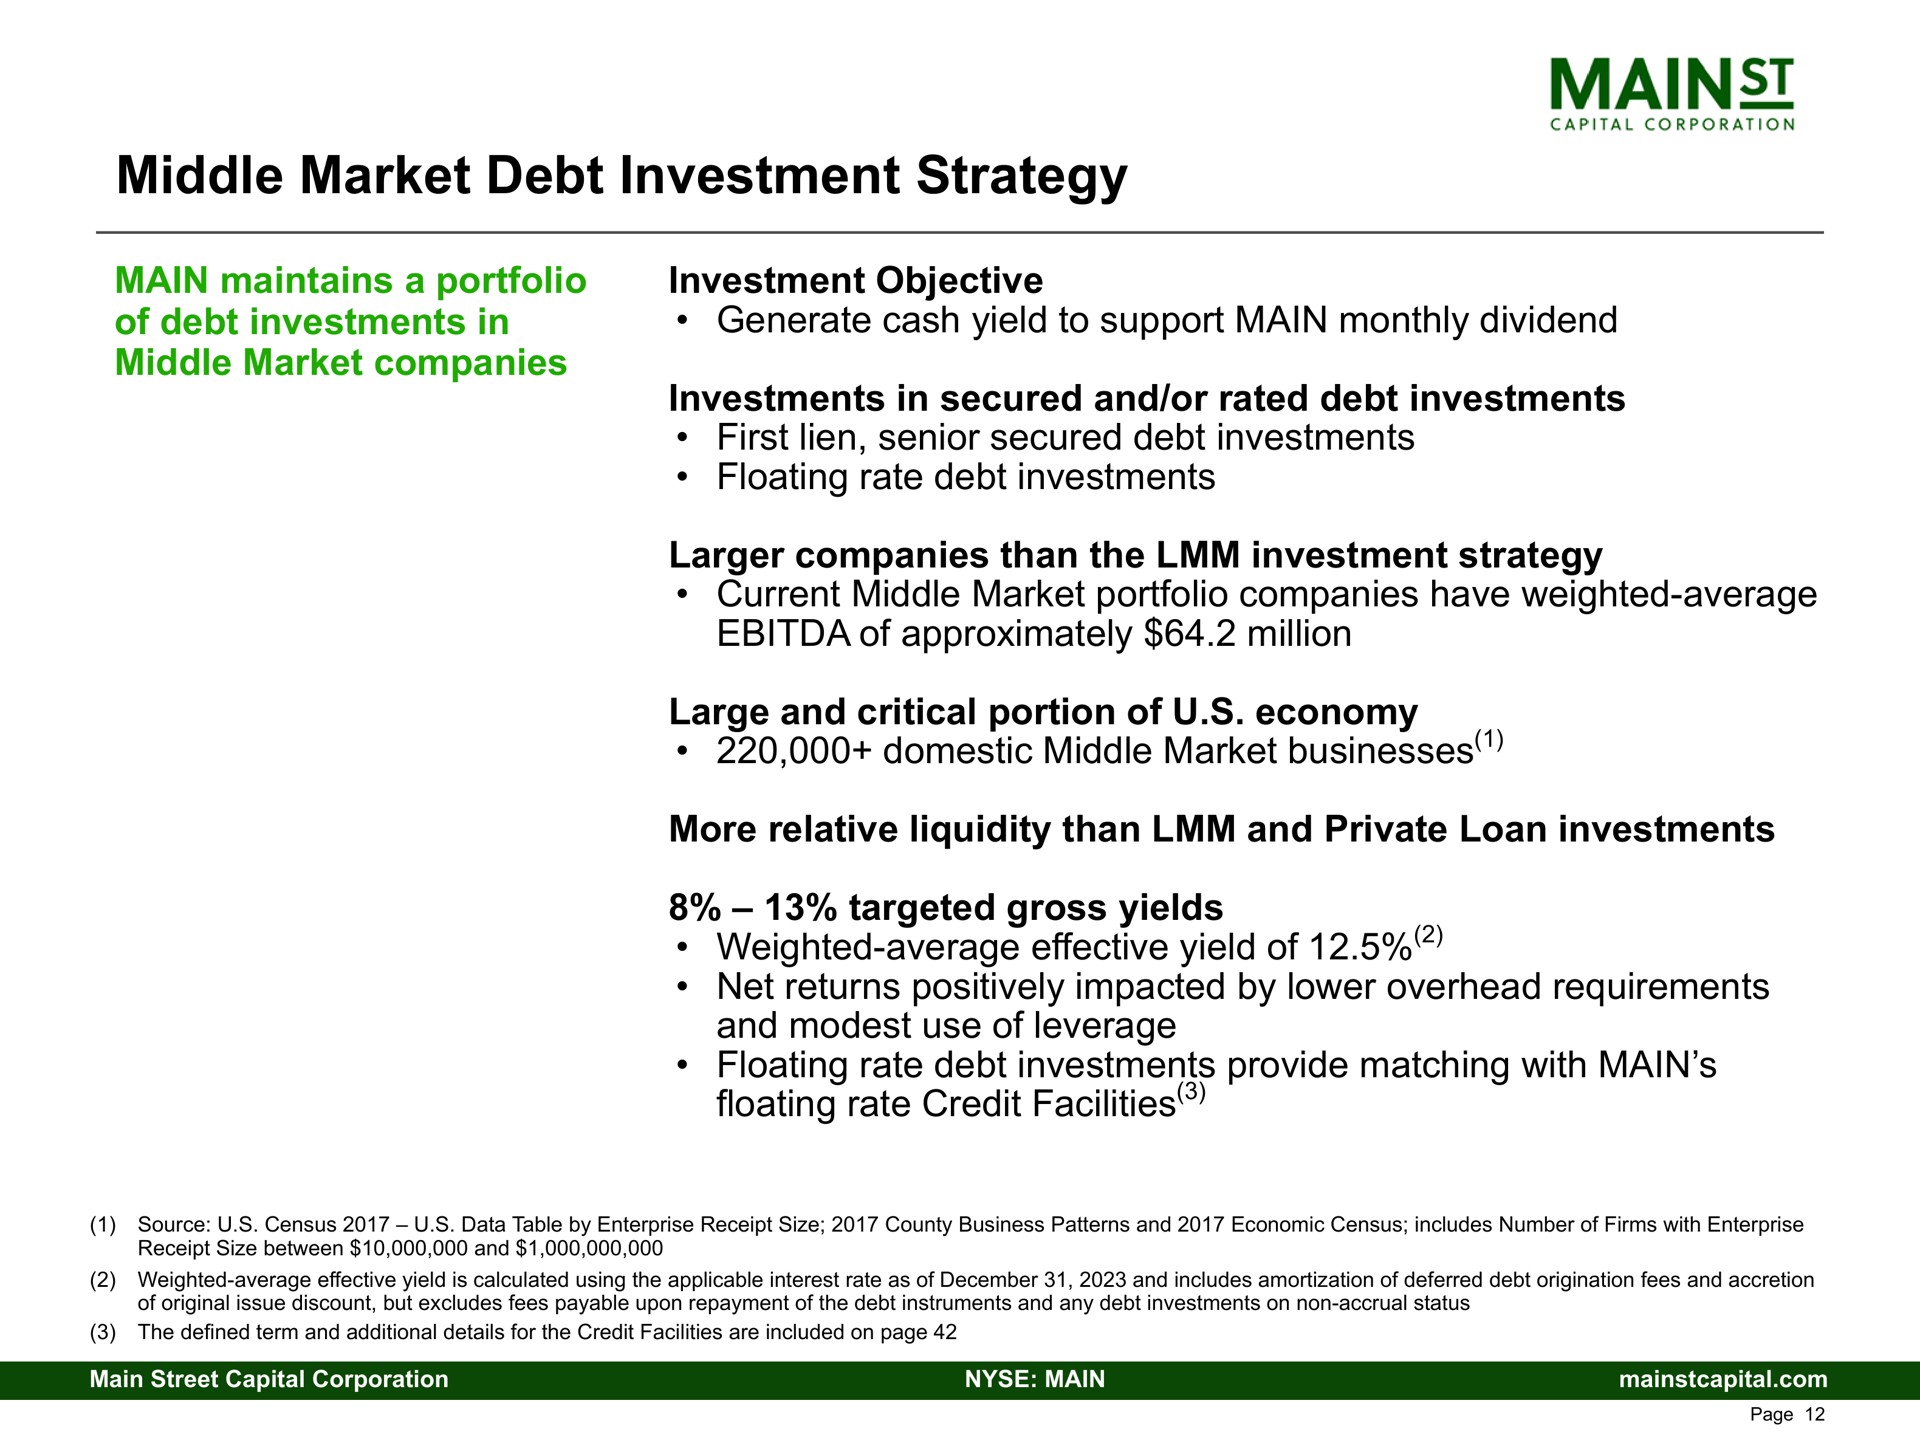 middle market debt investment strategy mains domestic businesses weighted average effective yield of floating rate credit facilities | Main Street Capital